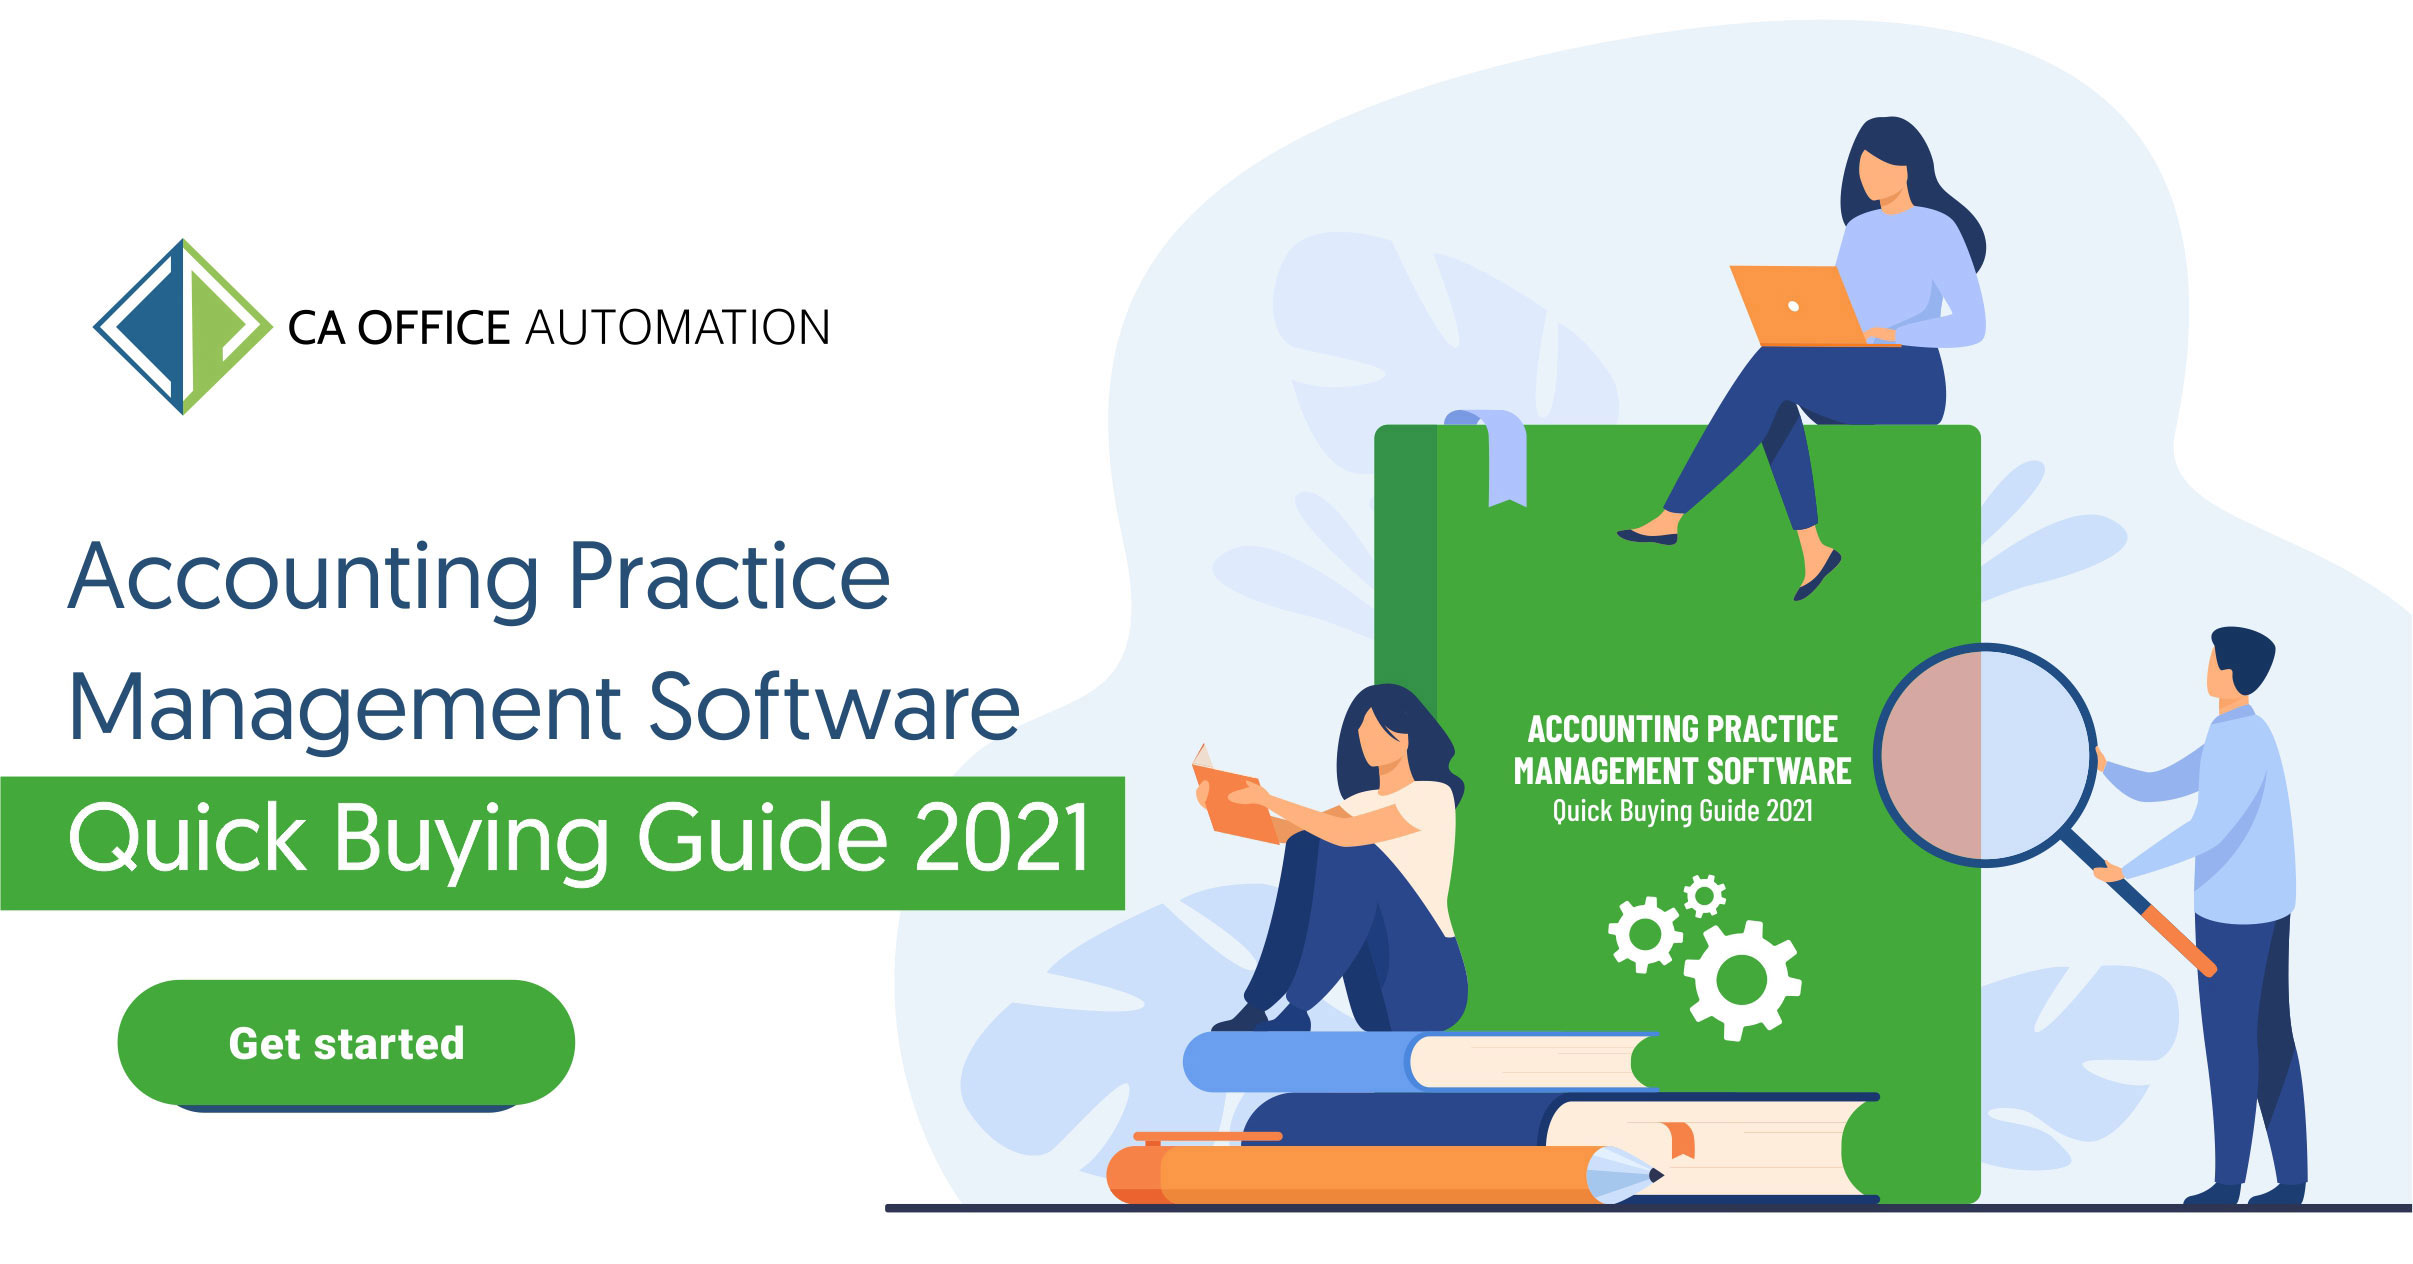 Accounting Practice Management Software Buying Guide 2021